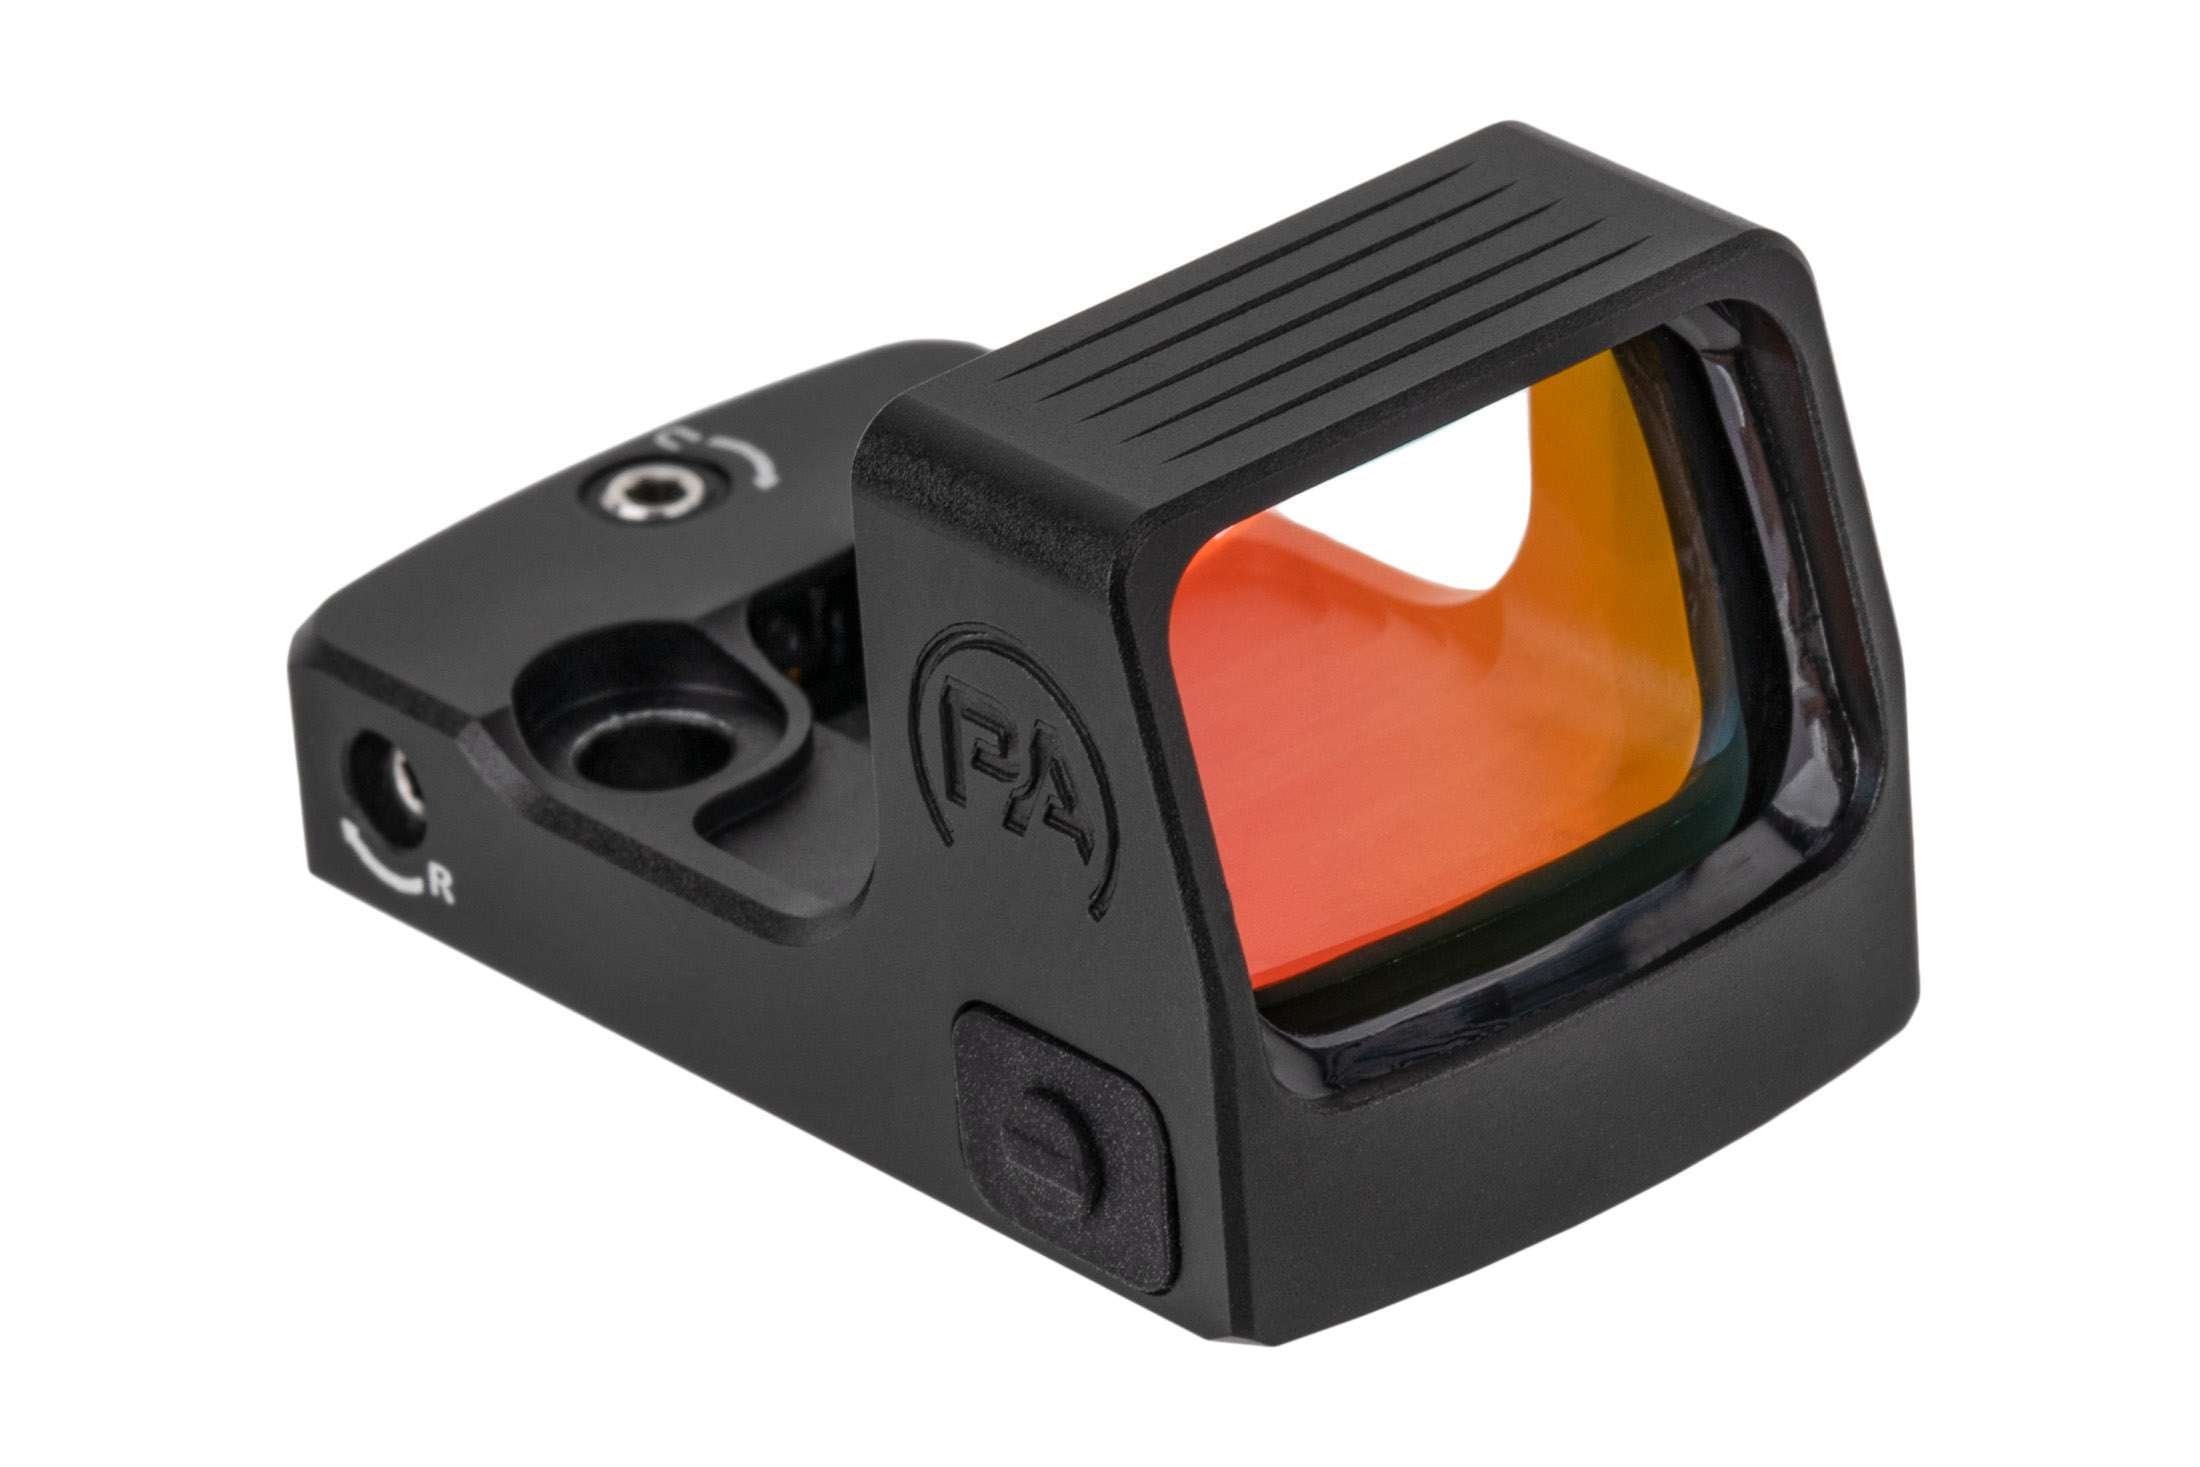 Primary Arms Classic Series 21mm Micro Reflex Sight - 3 MOA Dot